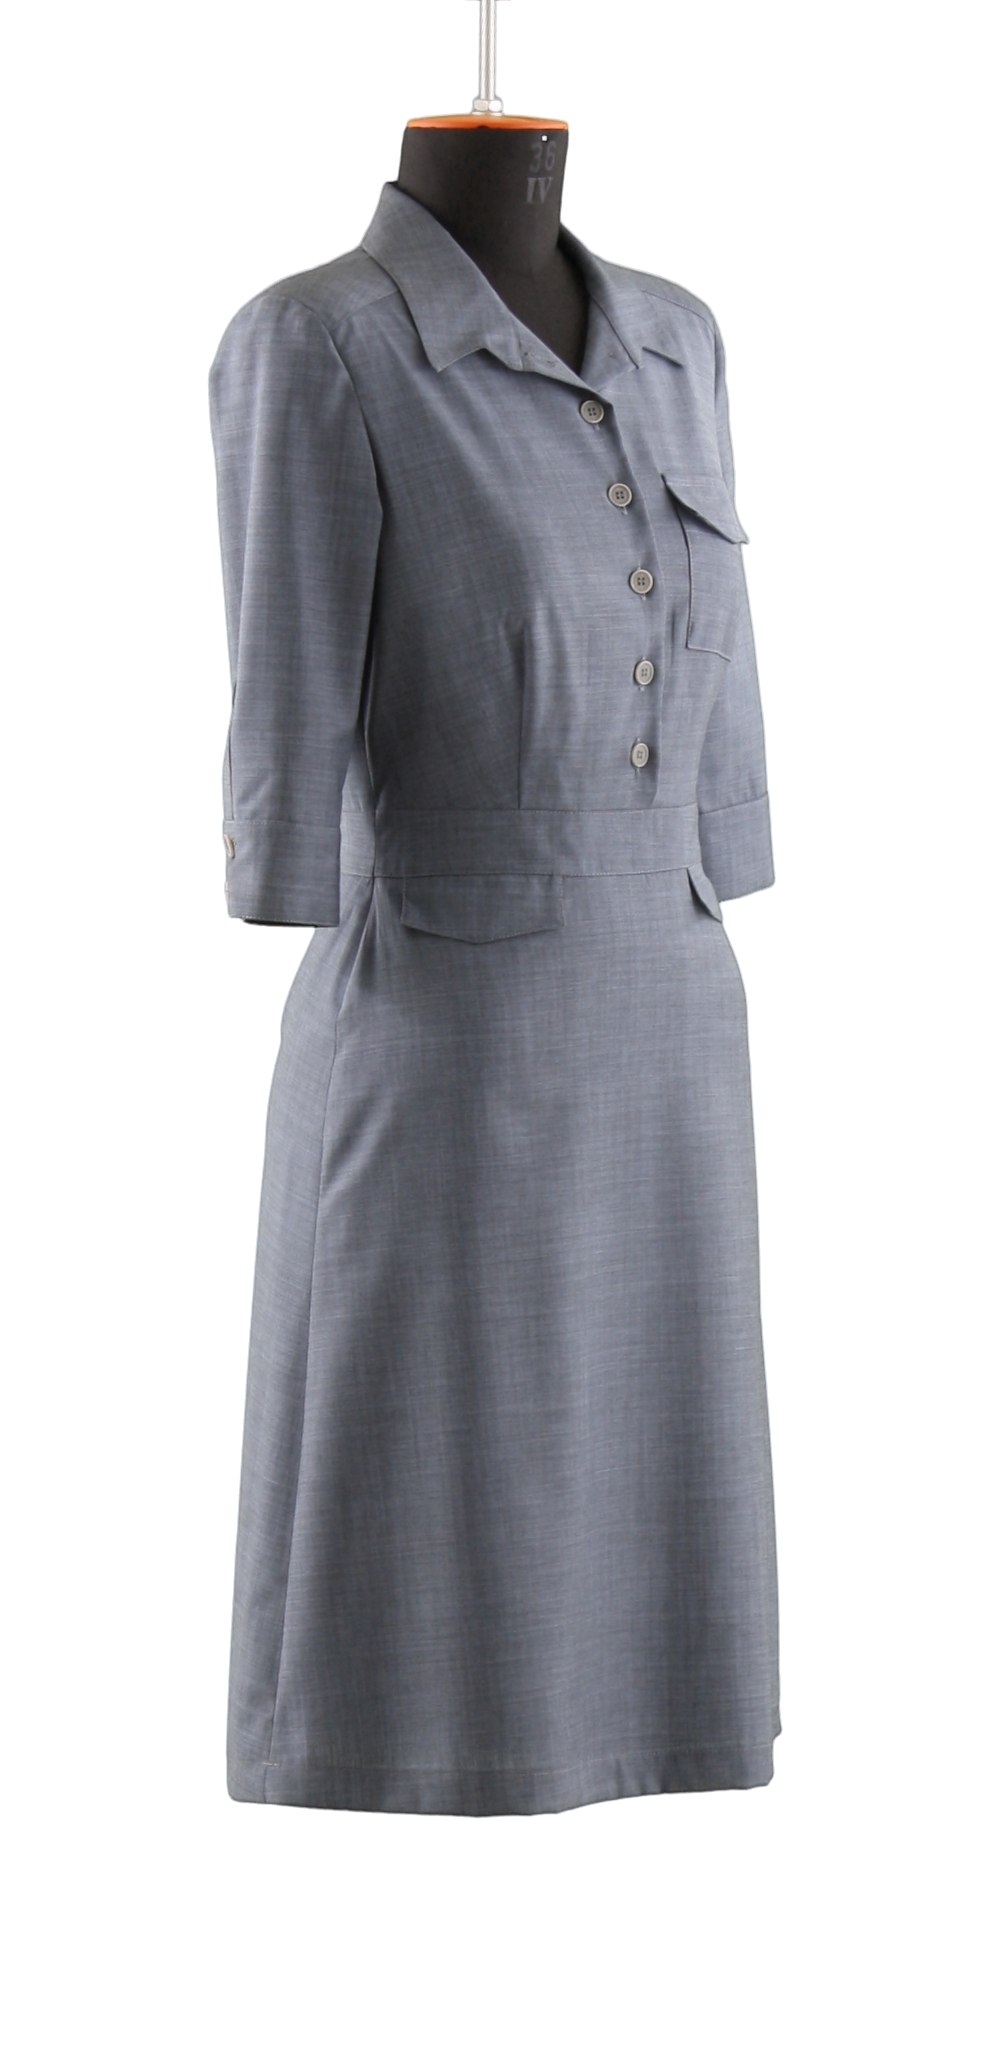 A simple grey, buttoned uniform dress belonging to the women collection with three quarter sleeves in 45 degrees sideways view on a headless mannequin with cutout background.